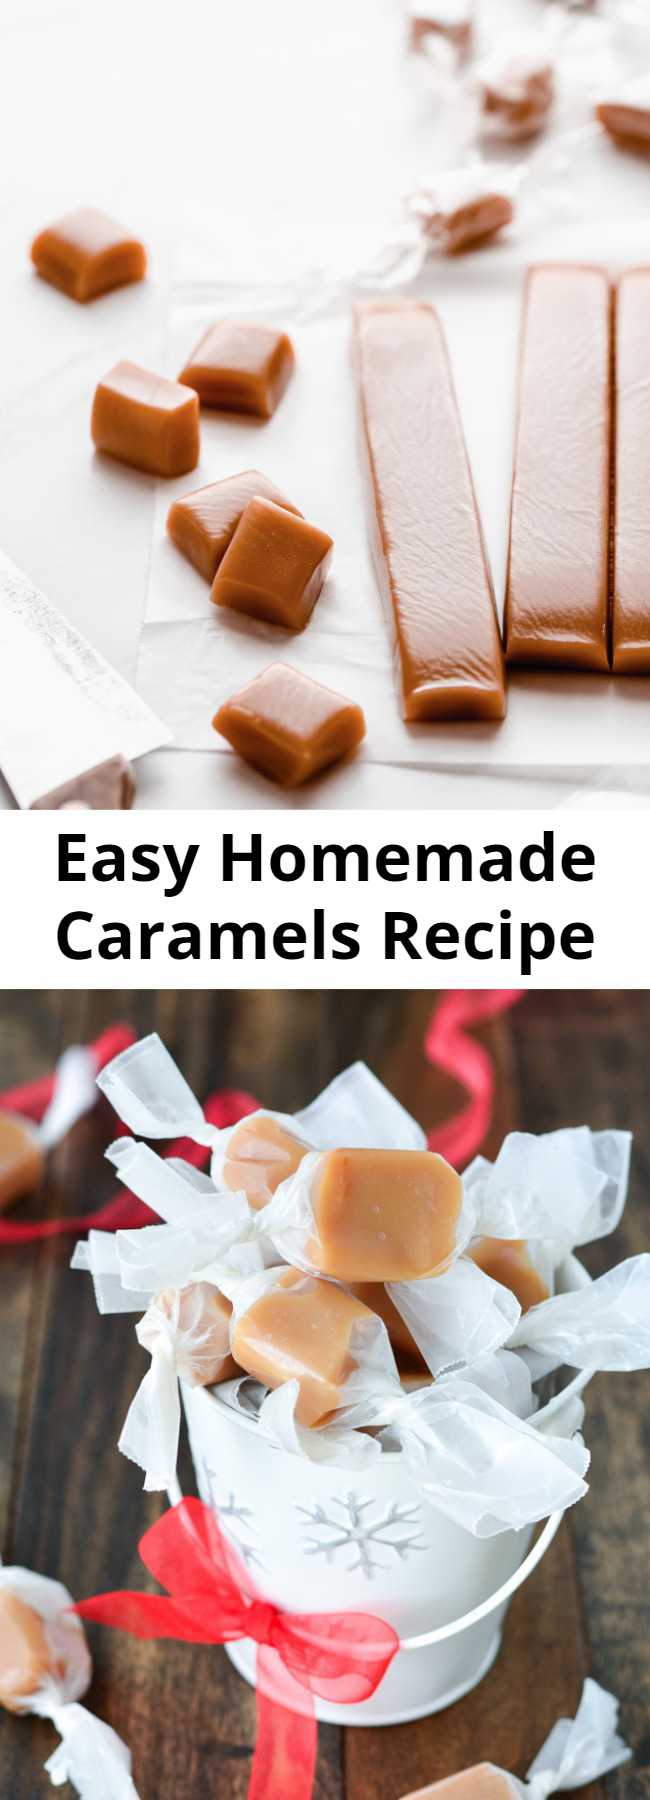 Easy Homemade Caramels Recipe - Soft, buttery, melt-in-your-mouth Homemade Caramels are the perfect holiday gift! Package them up and enjoy this heavenly candy all season long.